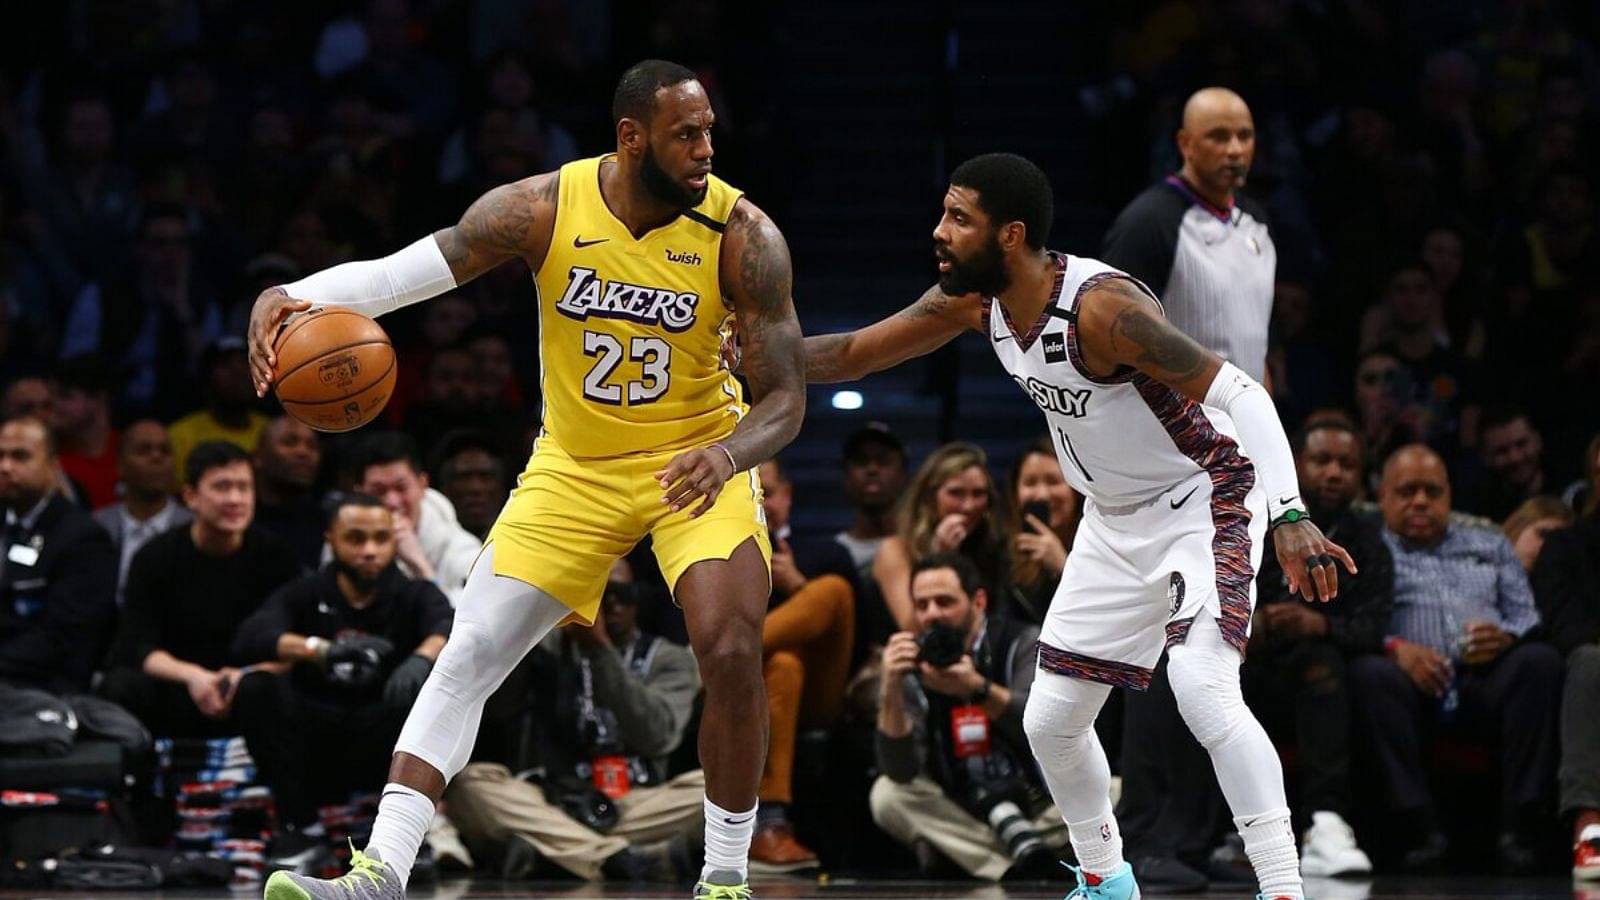 Much like his former billionaire teammate LeBron James, Kyrie Irving wishes to play until he's 38 even if it means playing around the world